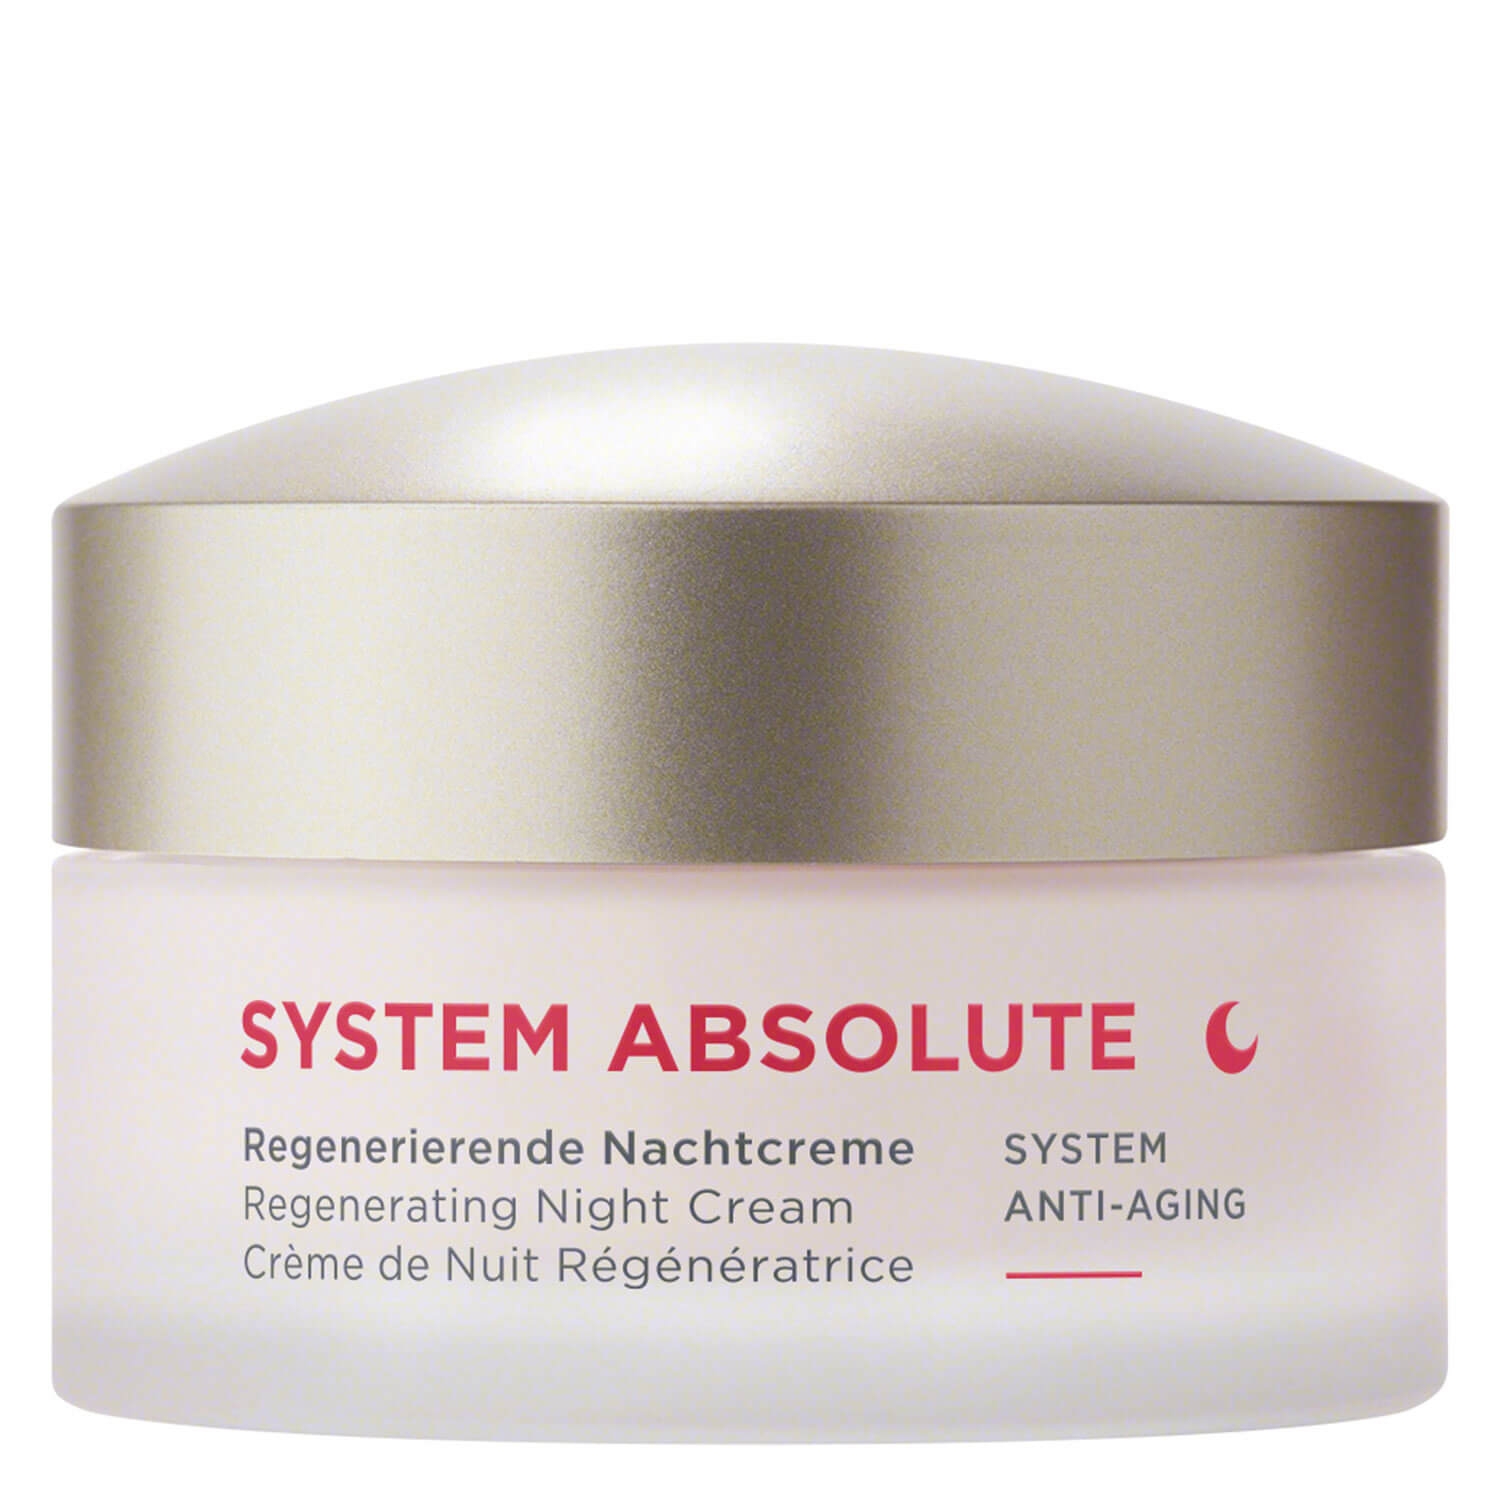 Product image from System Absolute - Anti-Aging Regenerierende Nachtcreme